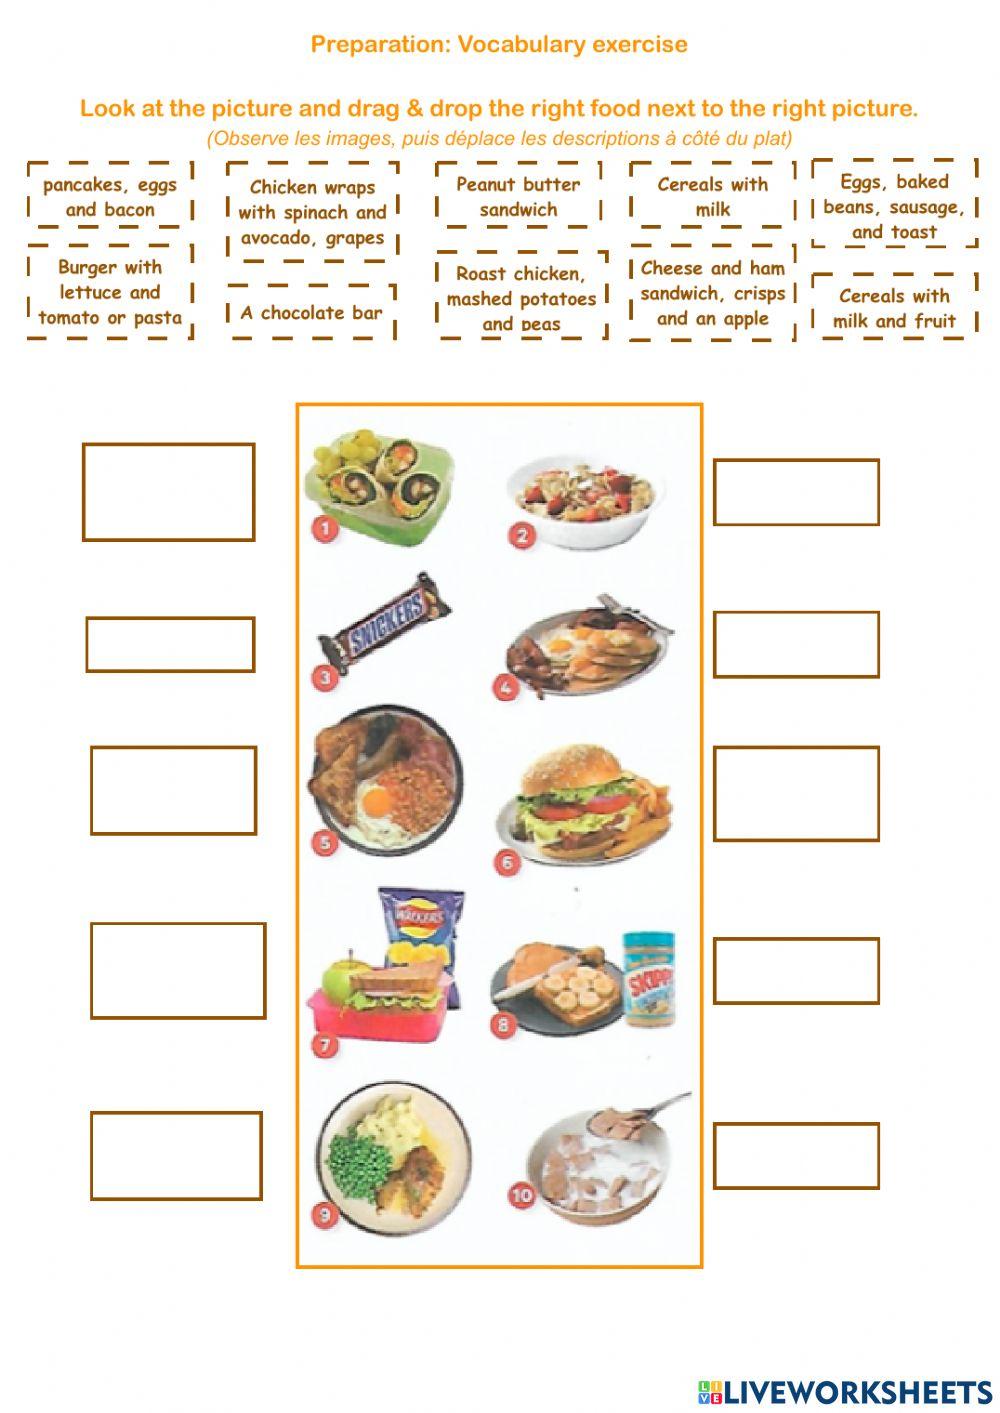 Food habits WS 2 and vocabulary